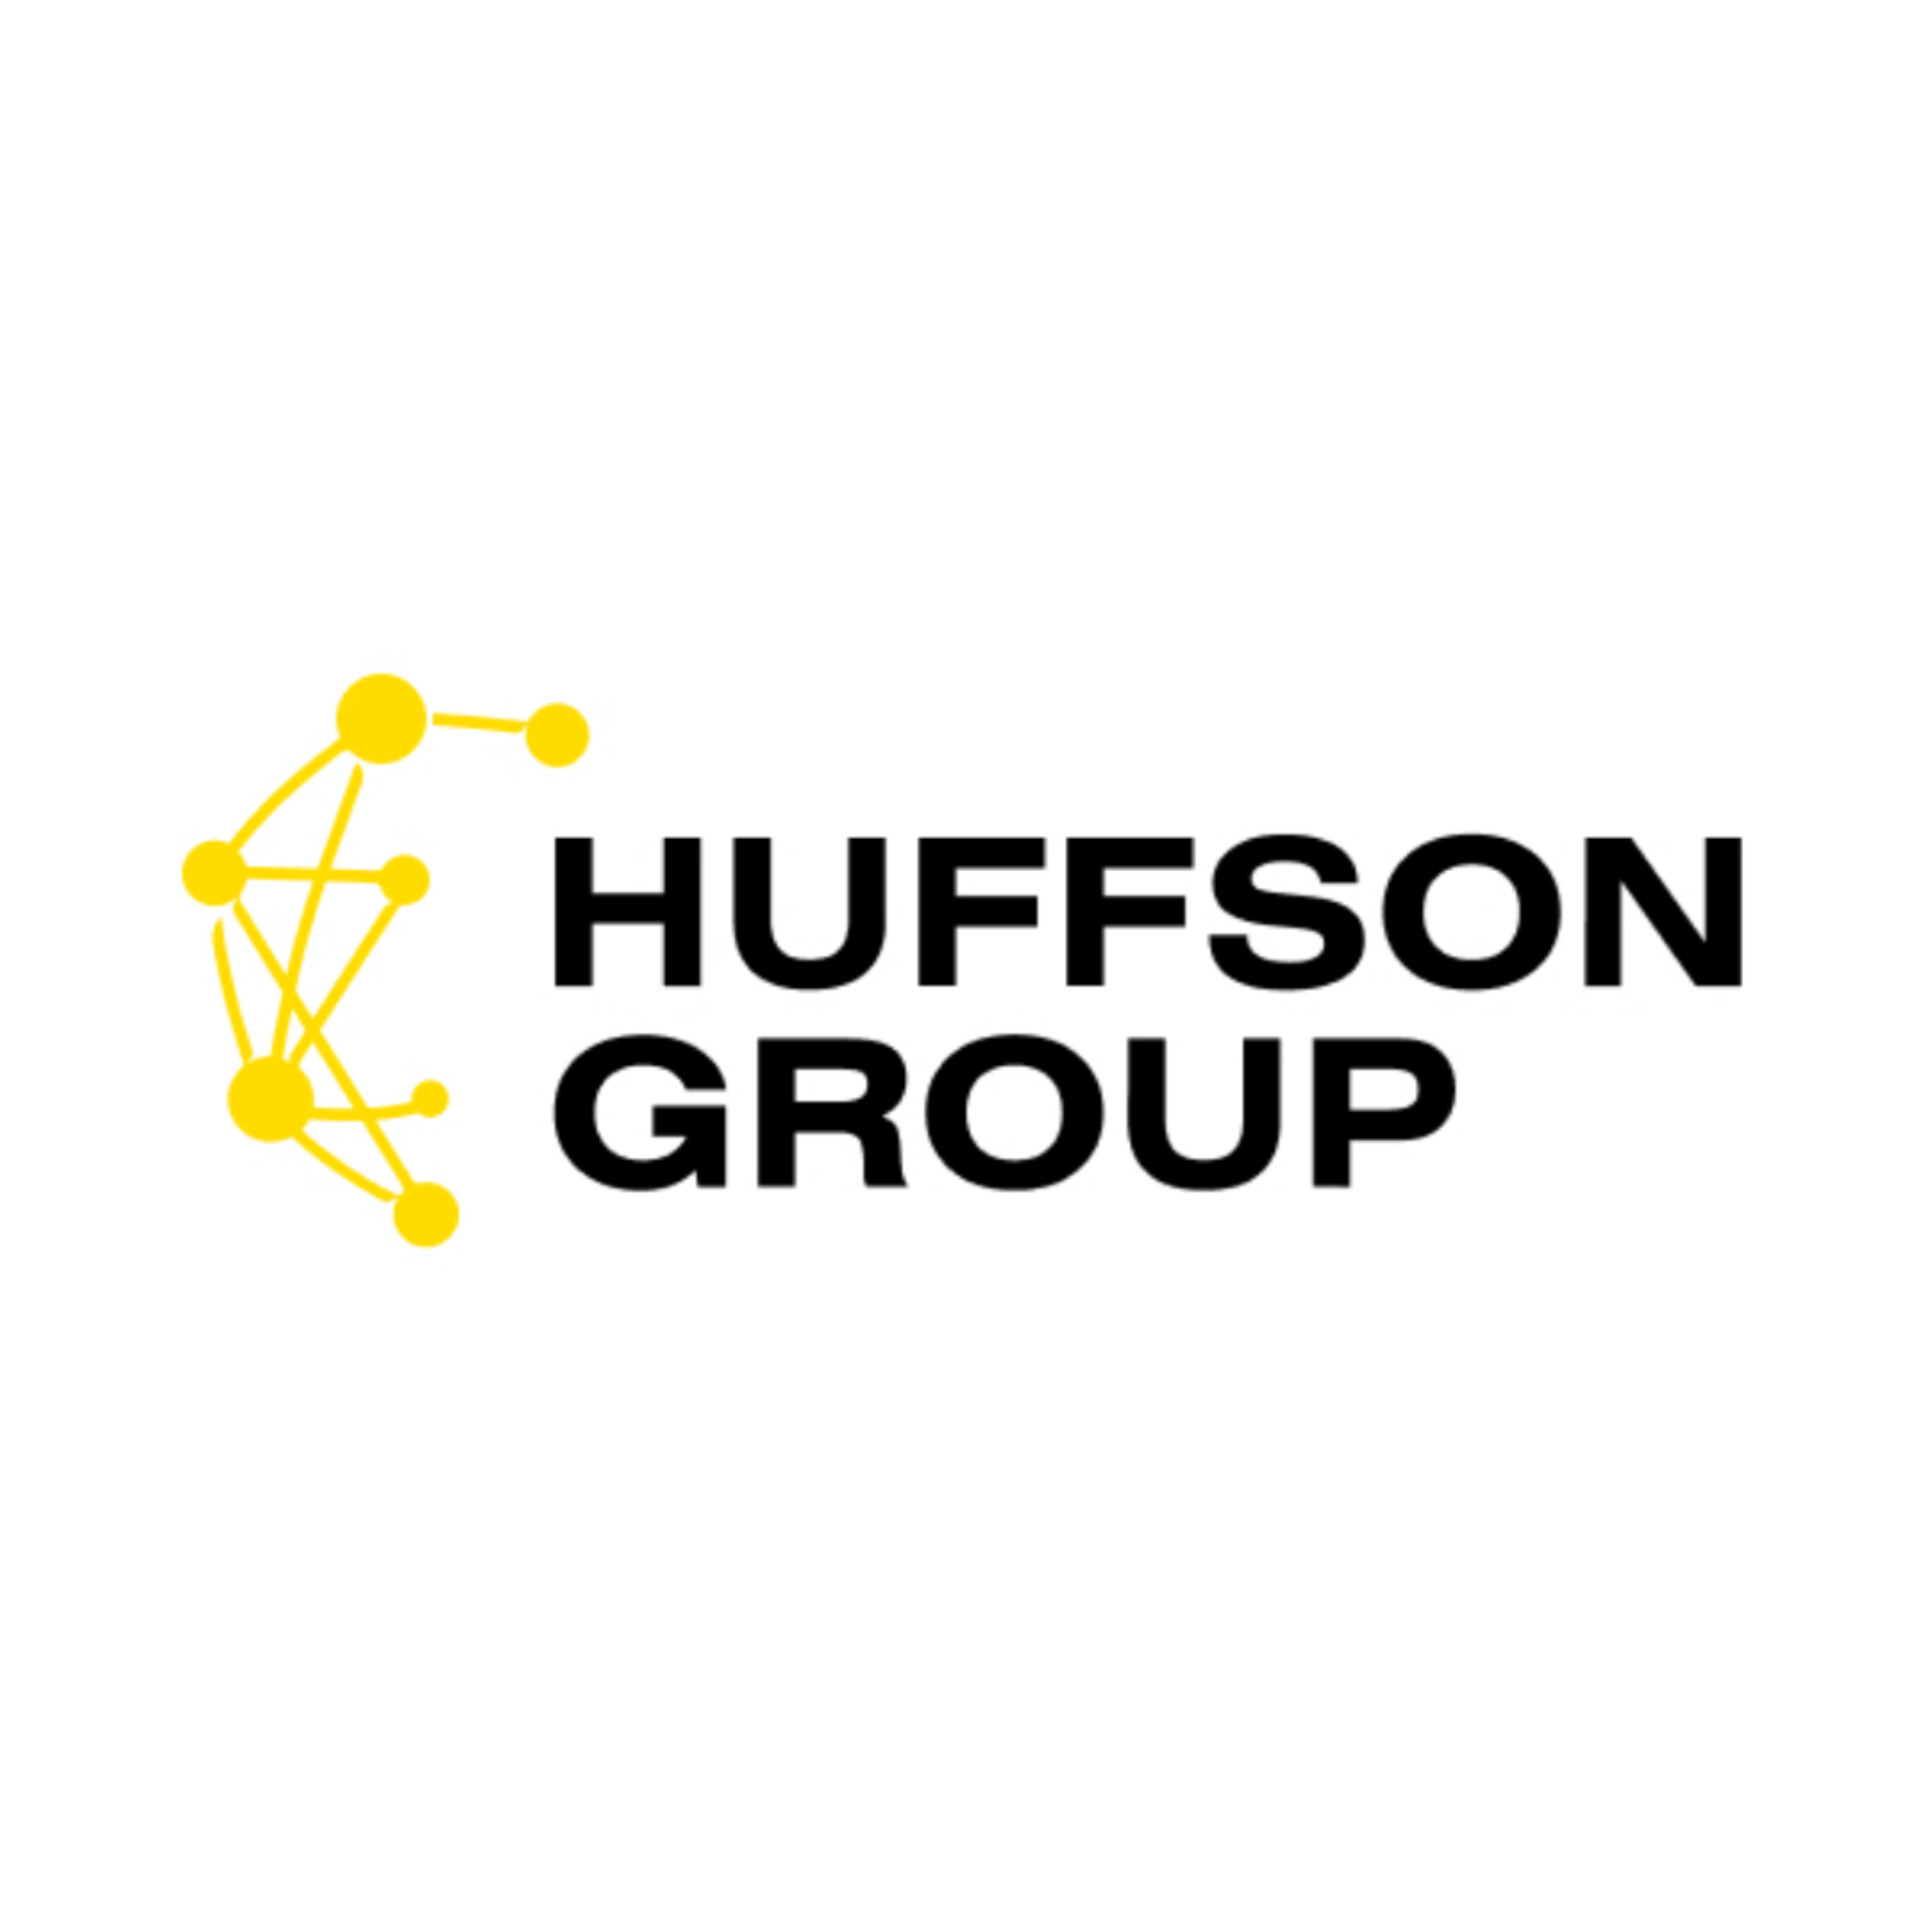 HUFFSON GROUP